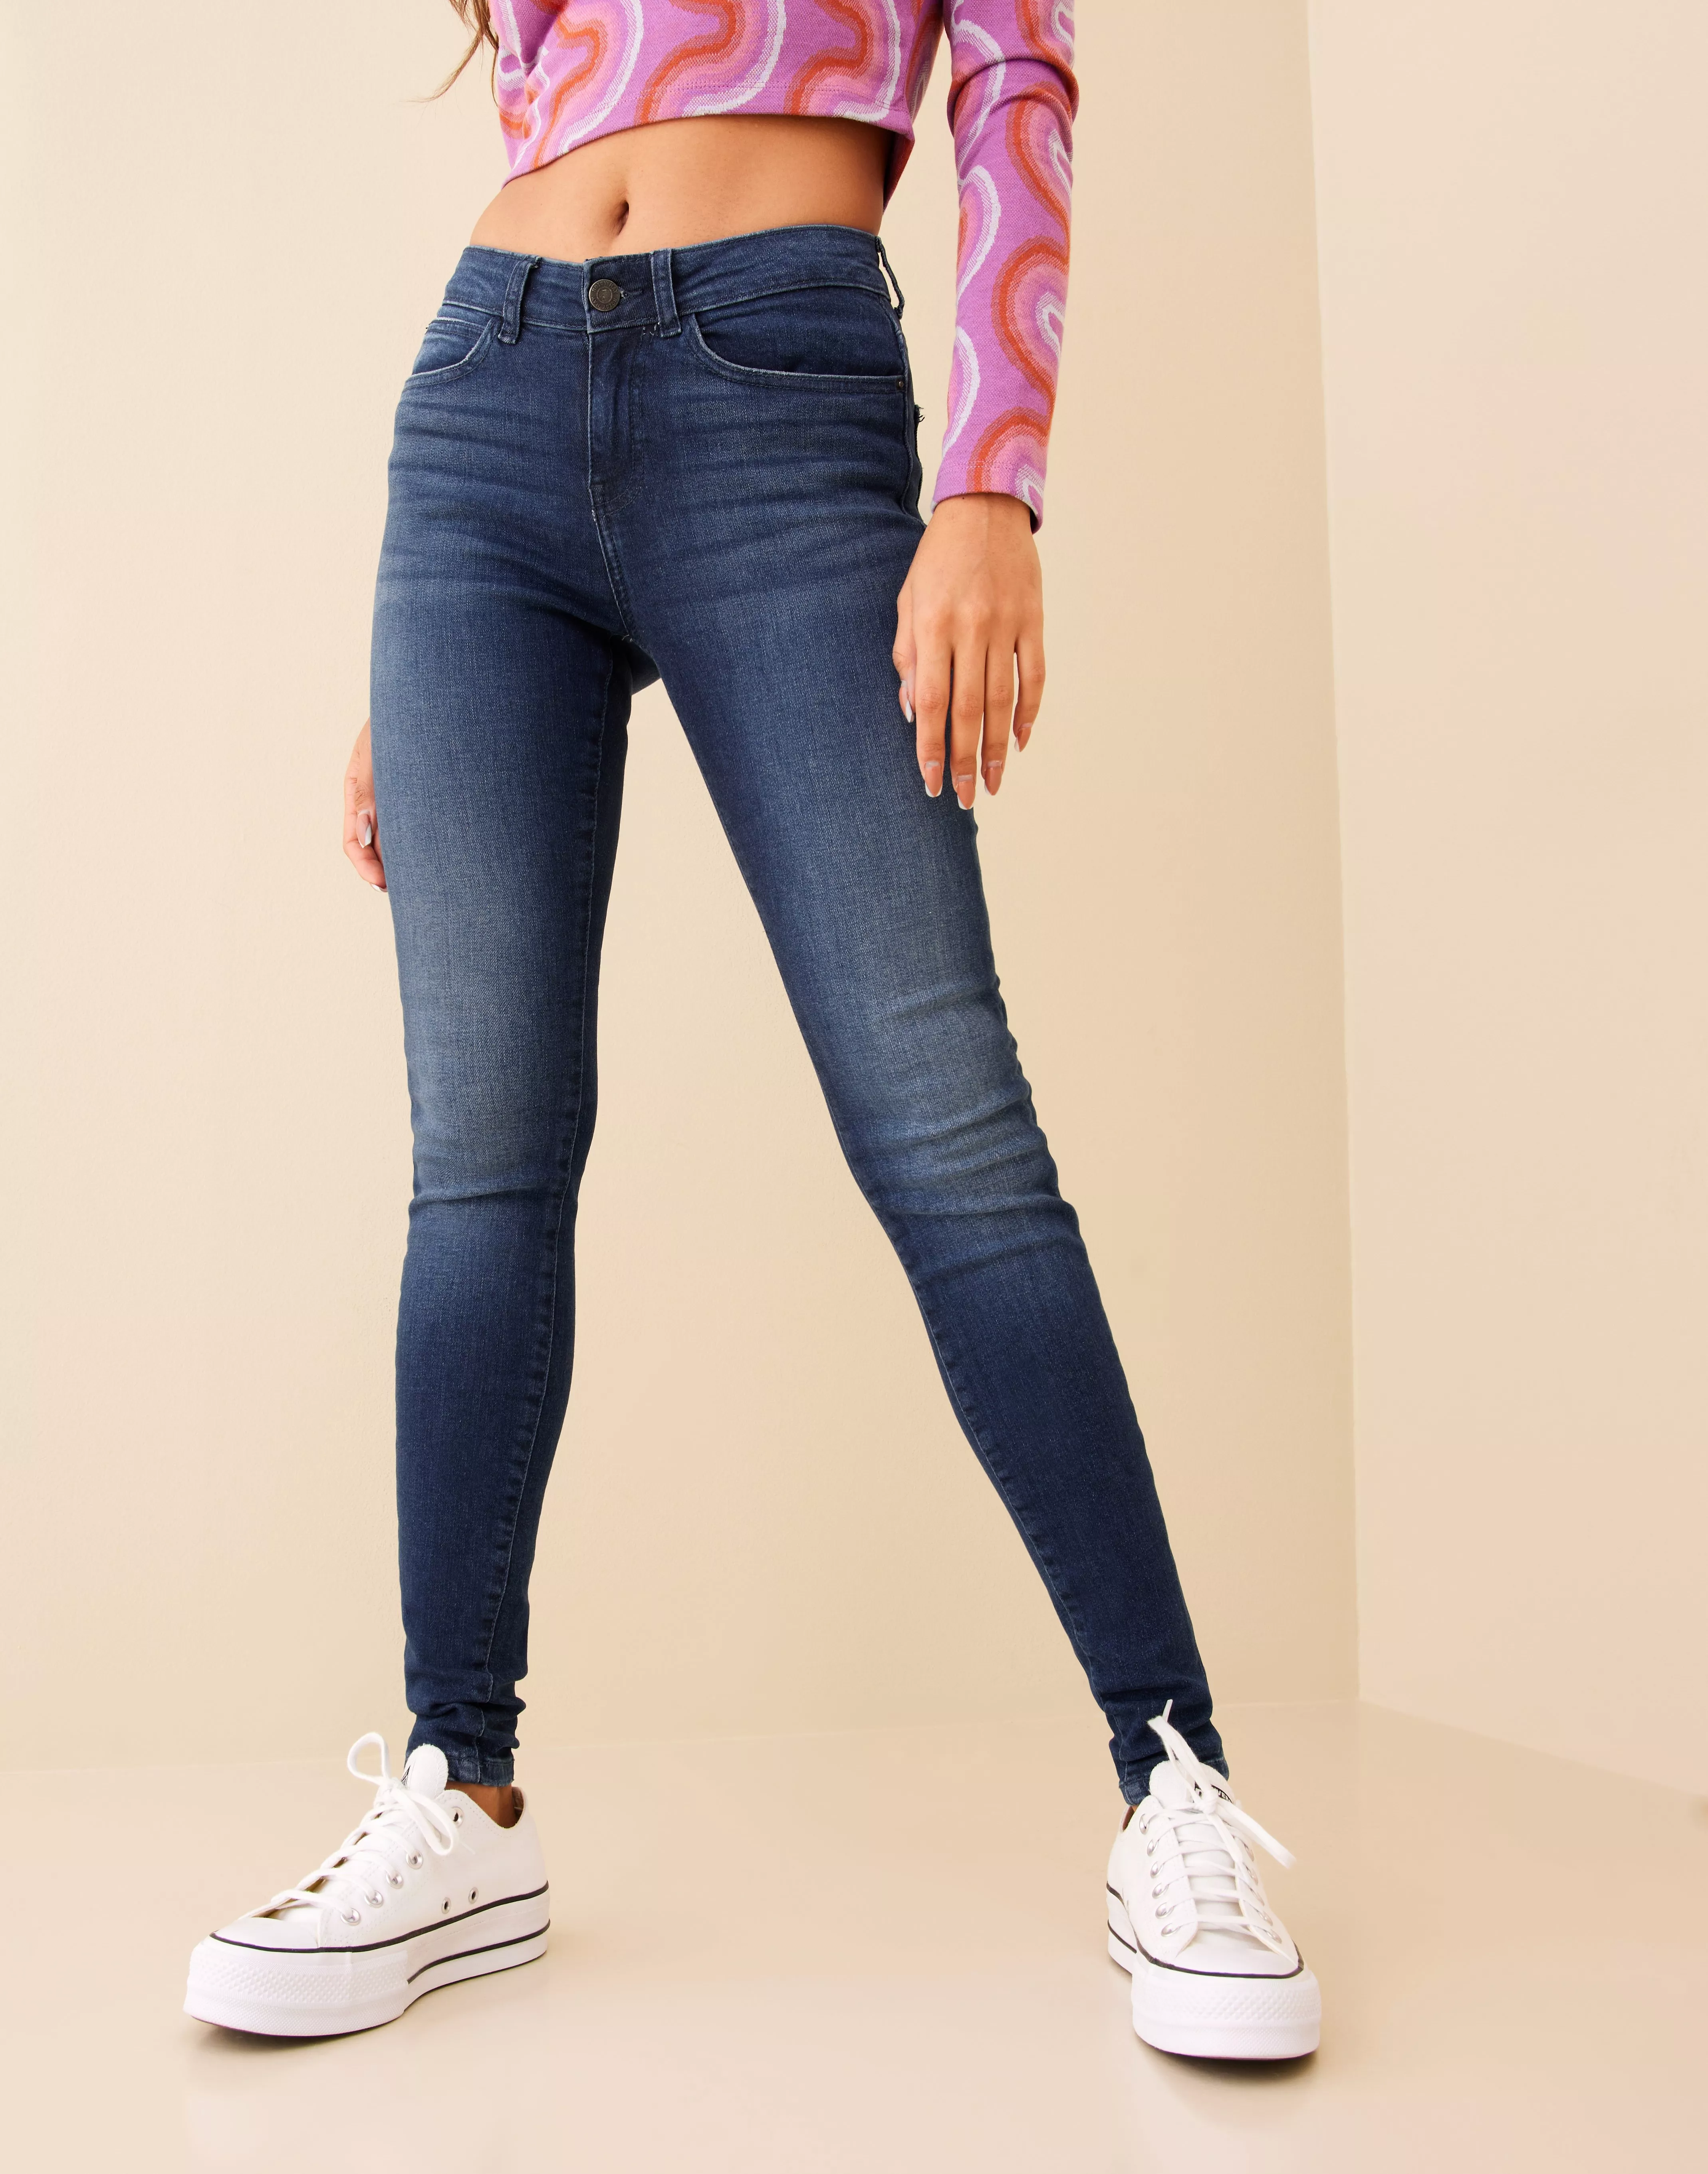 discount 70% Desigual Jeggings & Skinny & Slim WOMEN FASHION Jeans Embroidery Blue 